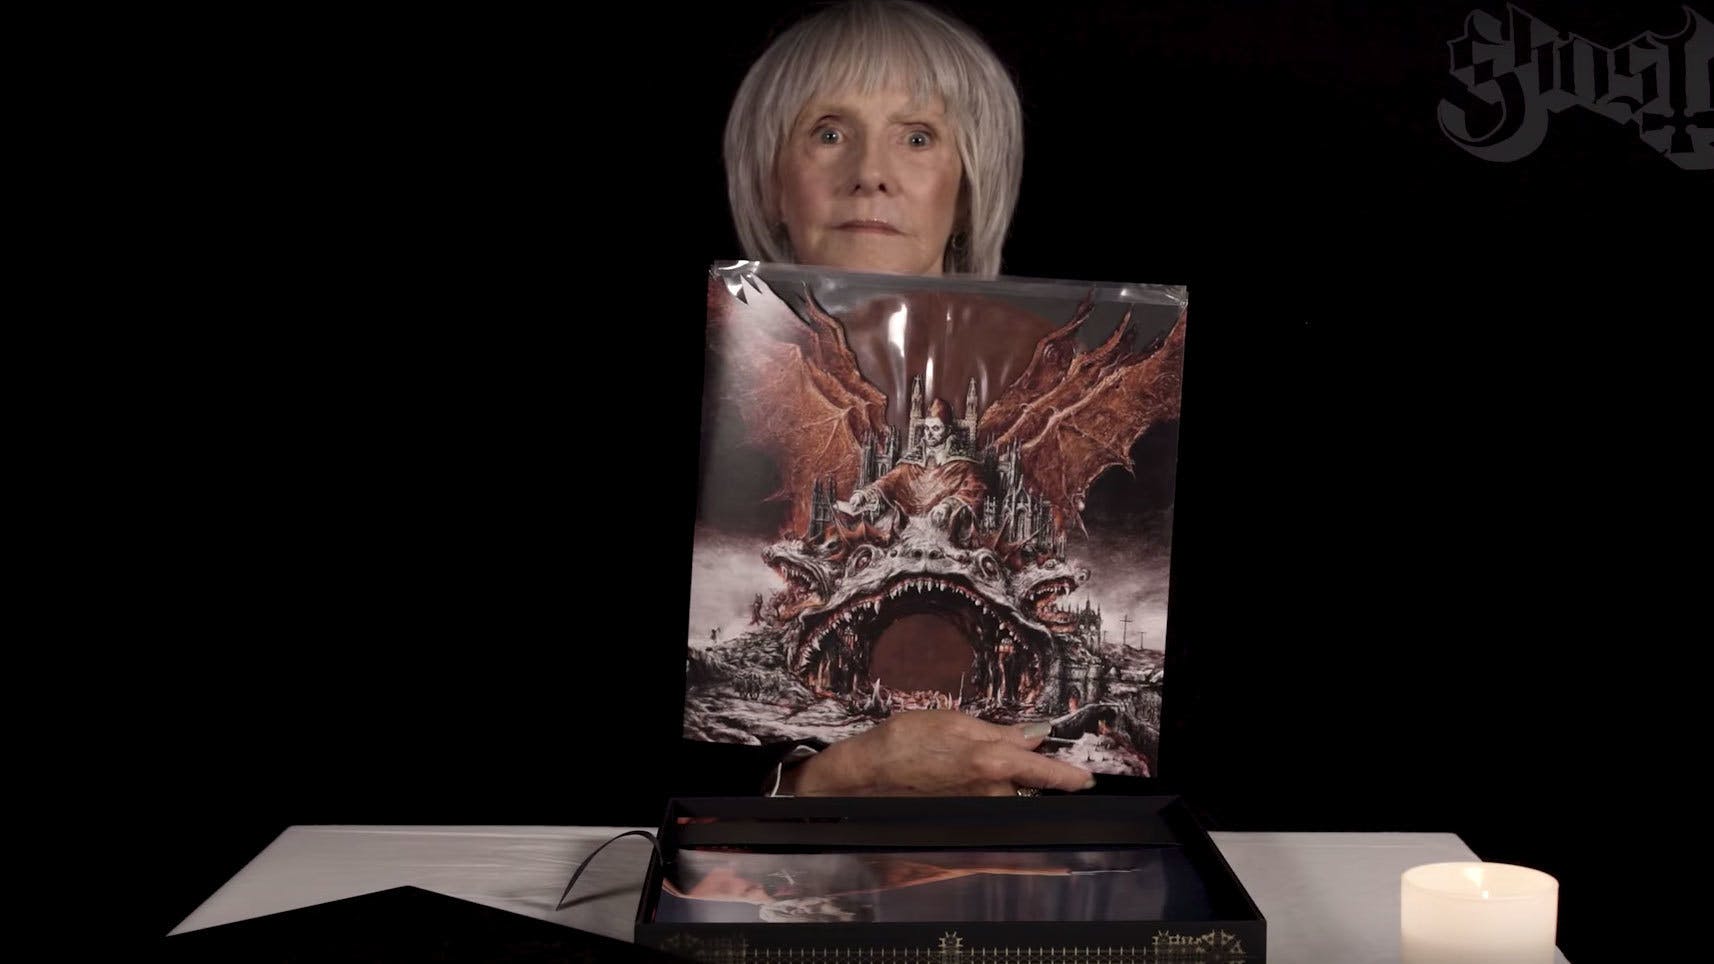 Sister Imperator Unboxes The New Ghost Prequelle Box Set